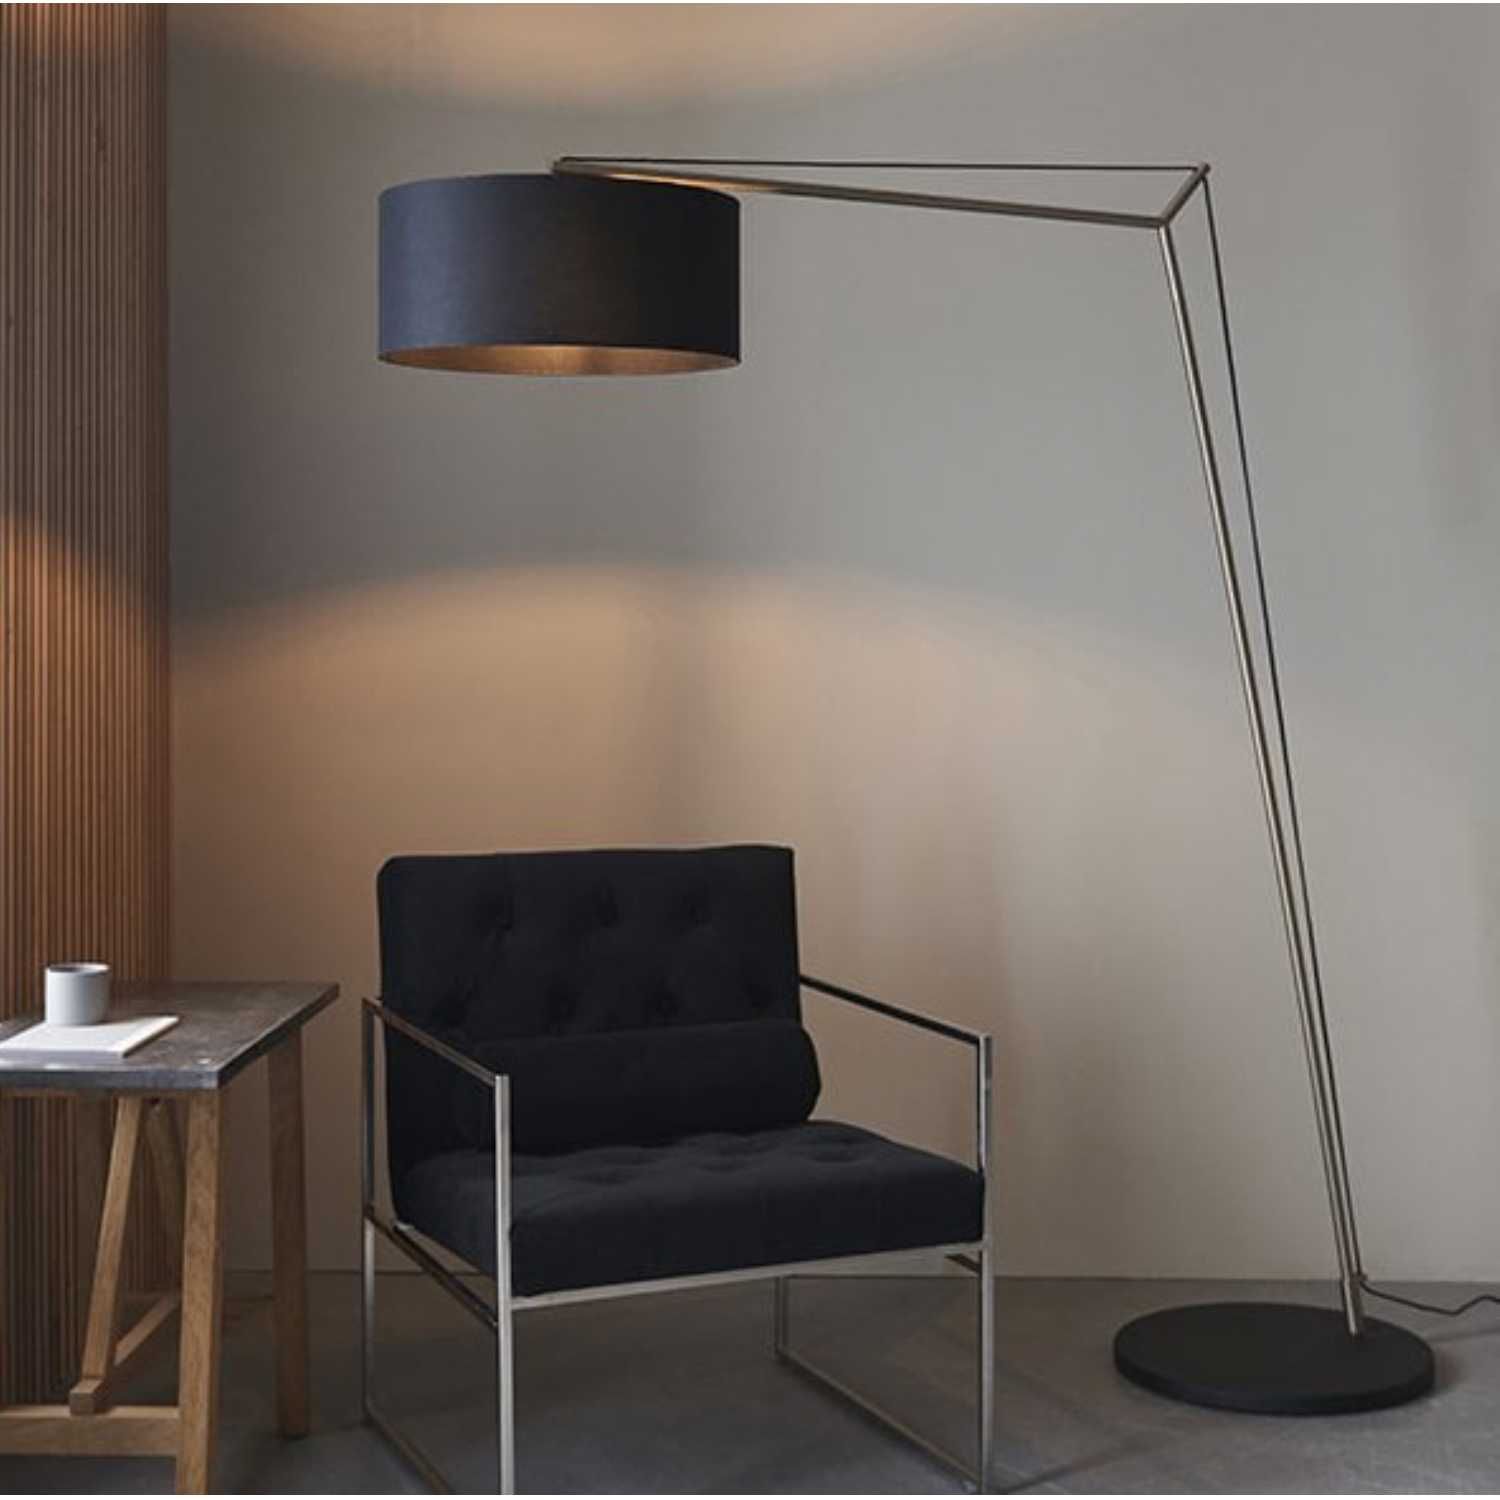 Modern Architect Antique Angular Oversized Nickel Floor Light With Black  Drum Shade – Cms Furniture With Regard To Angular Floor Lamps (View 3 of 15)